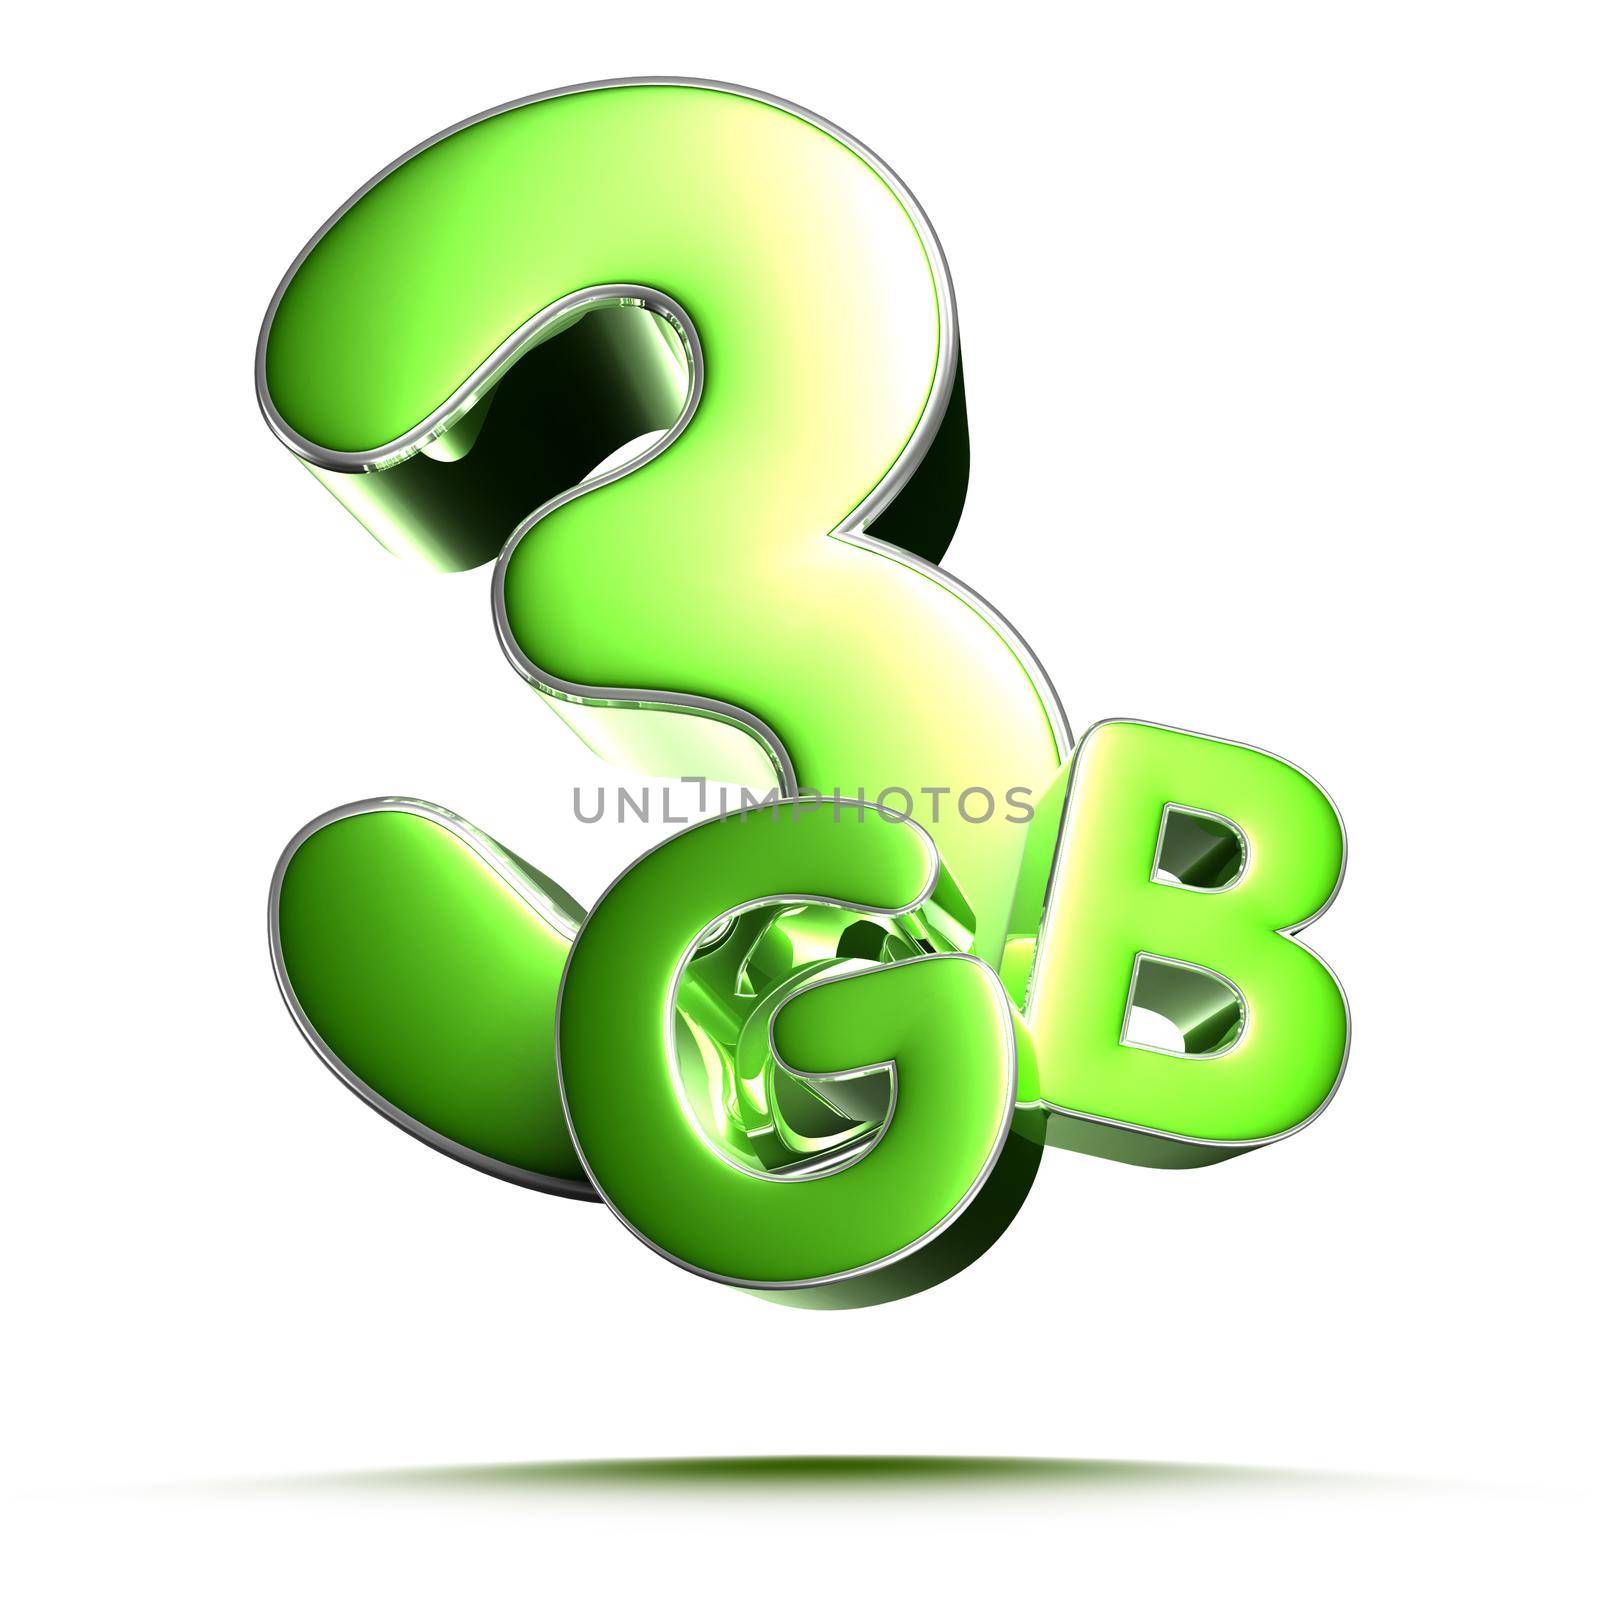 3 Gb green 3D illustration on white background with clipping path.